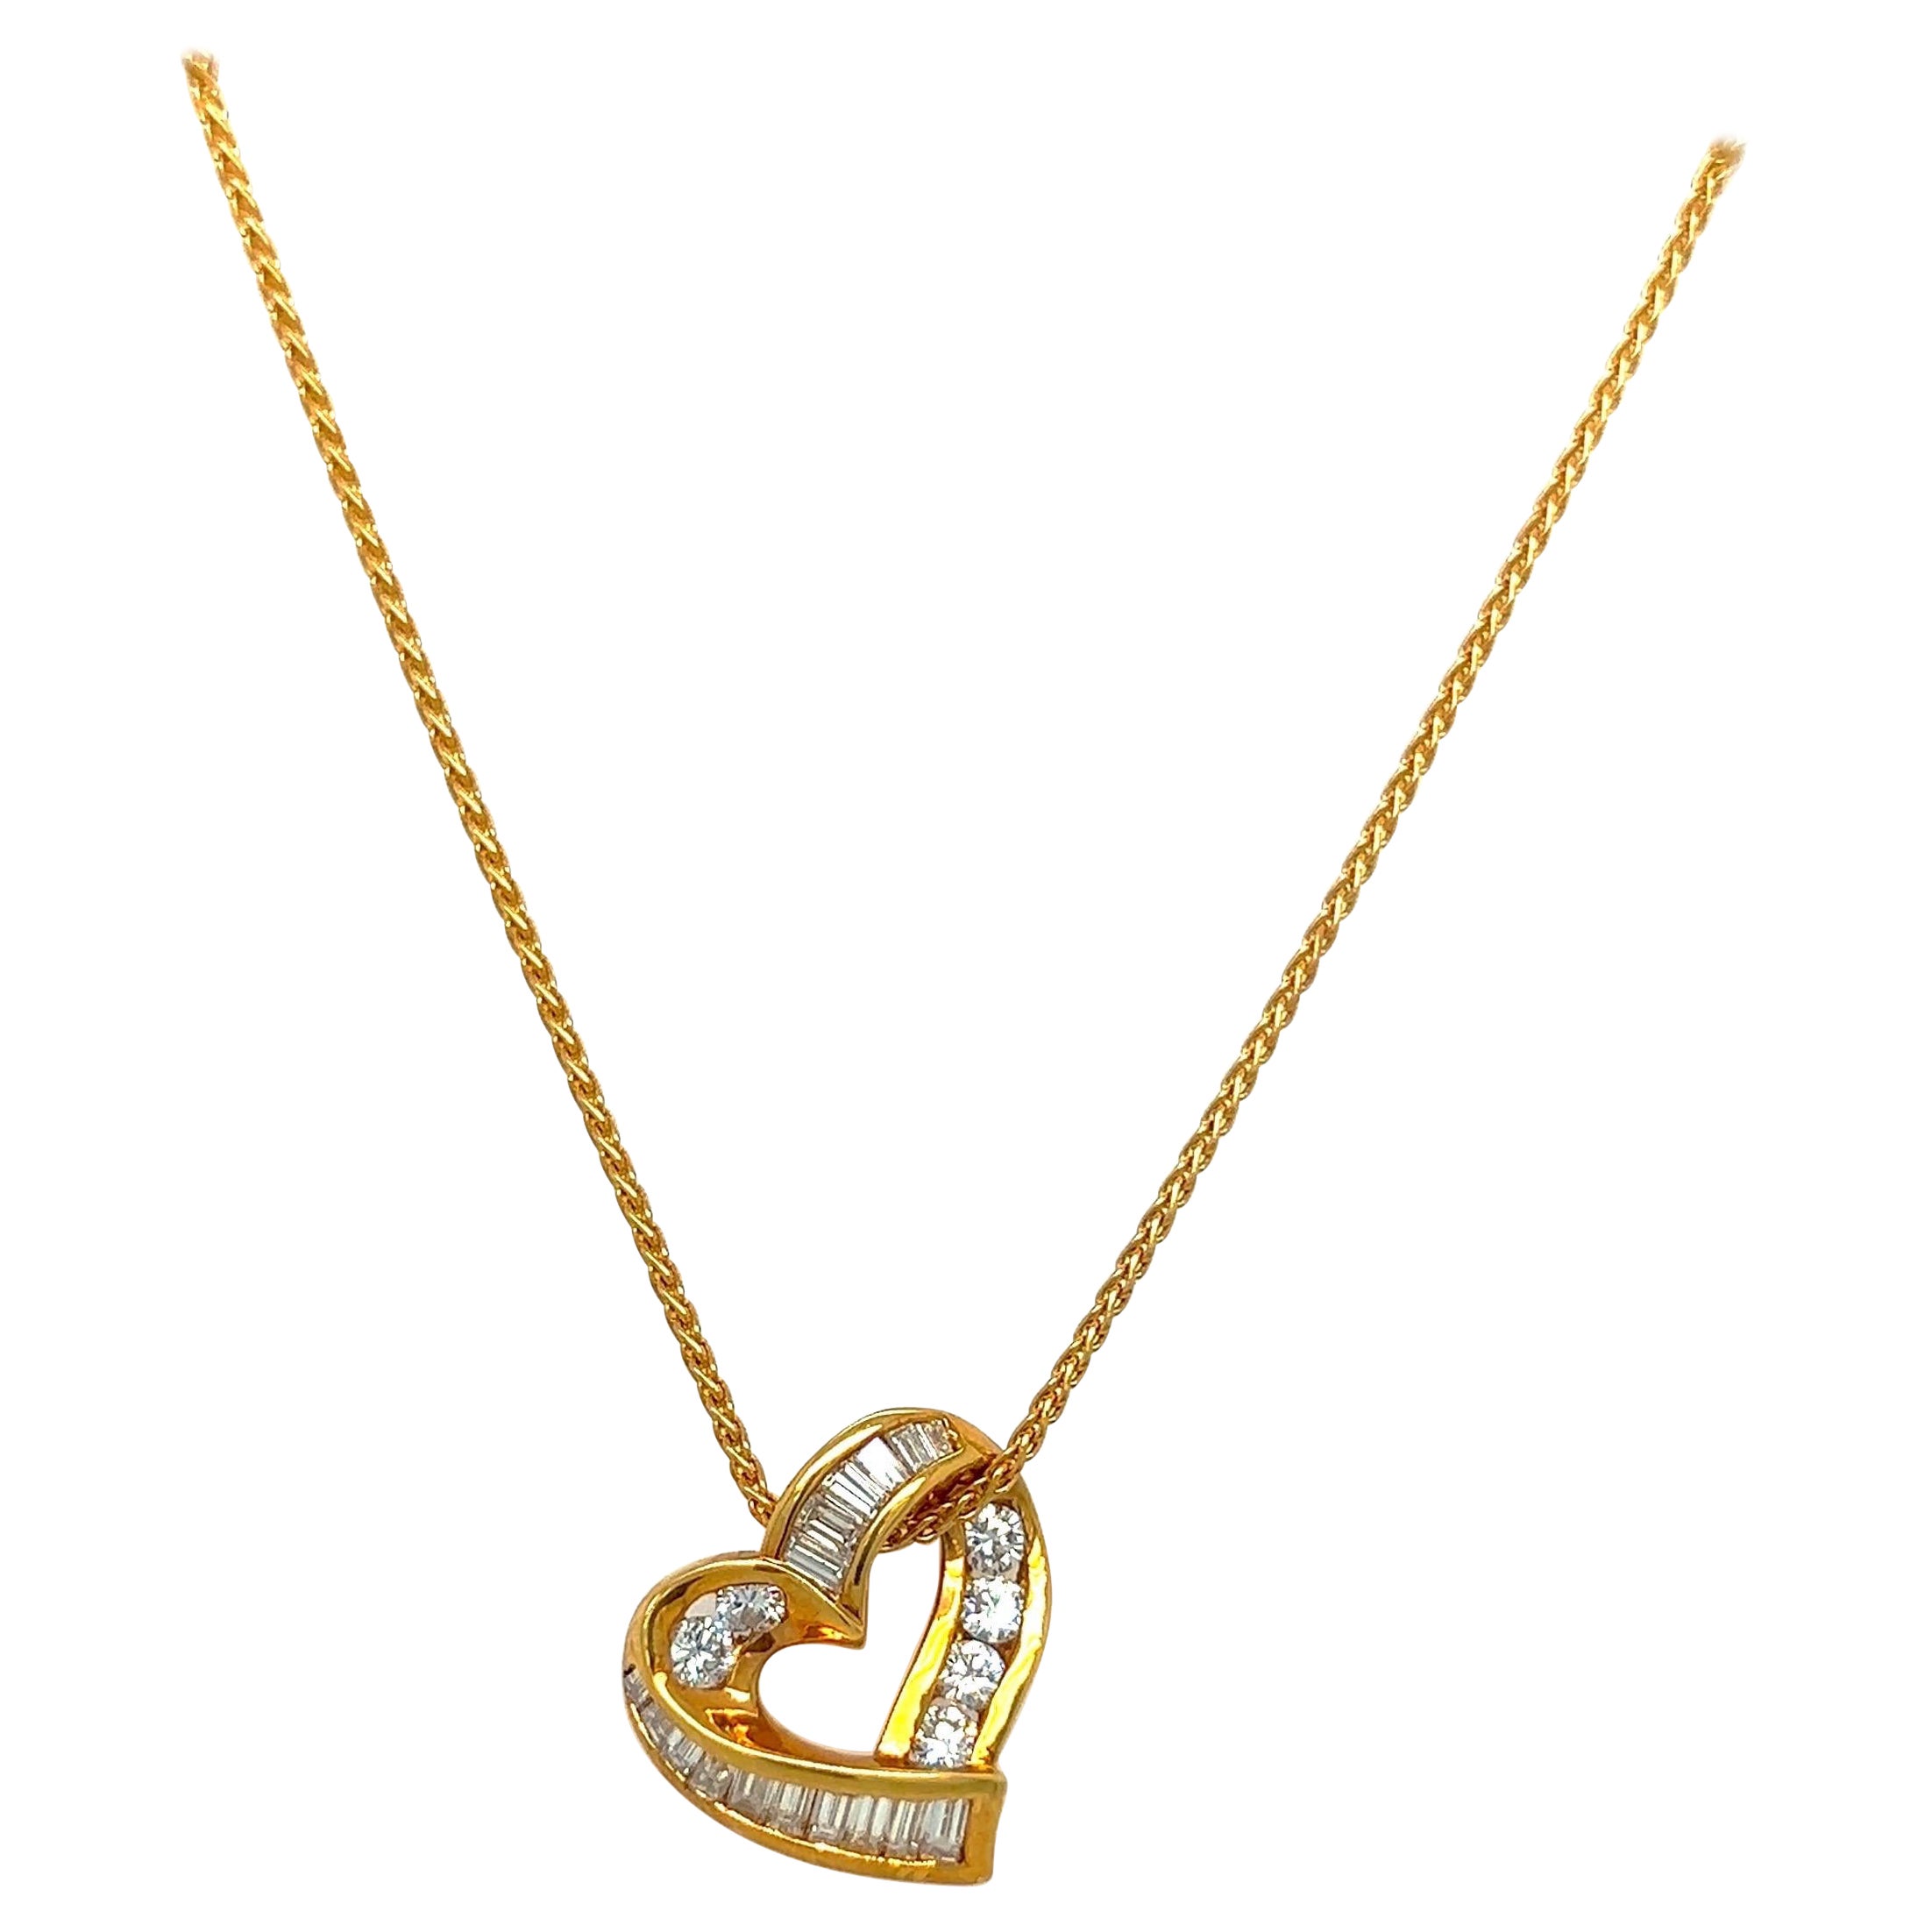 Charles Krypell 18 KT Yellow Gold 1.04 Cts. Diamond Heart Pendant For Sale